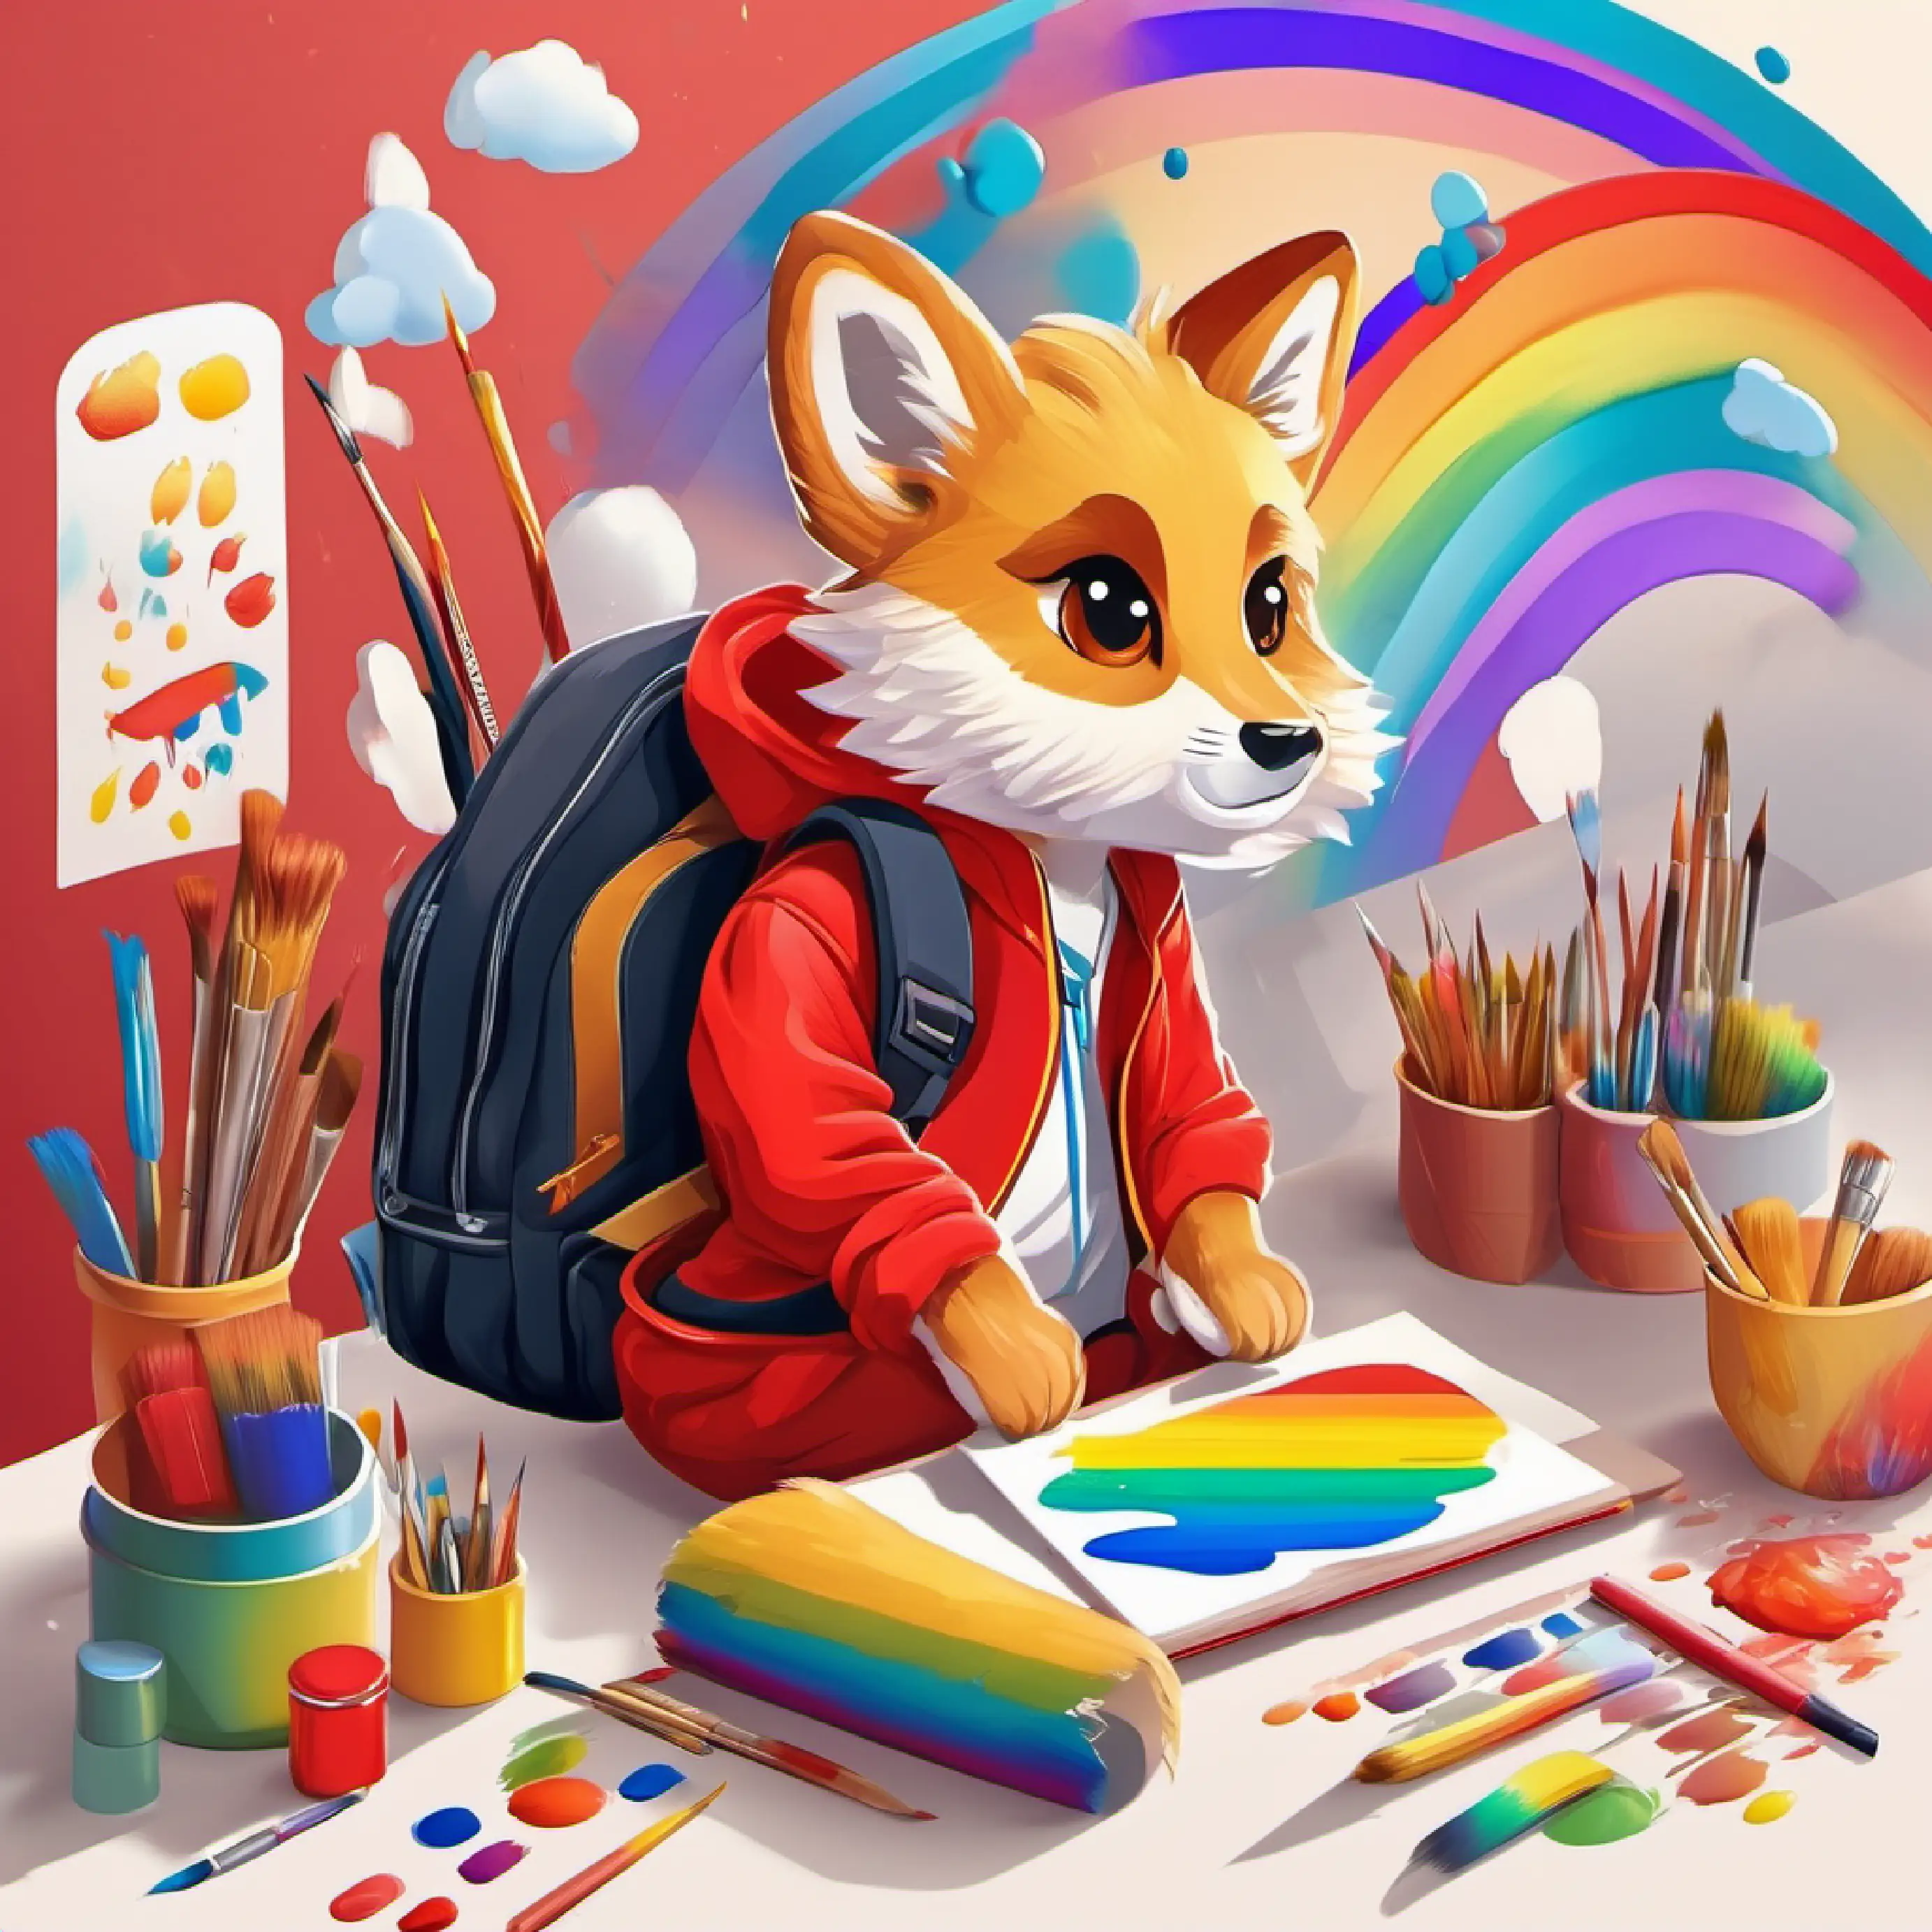 Afternoon art class, Golden fur, round black eyes, wearing a red backpack paints a rainbow.